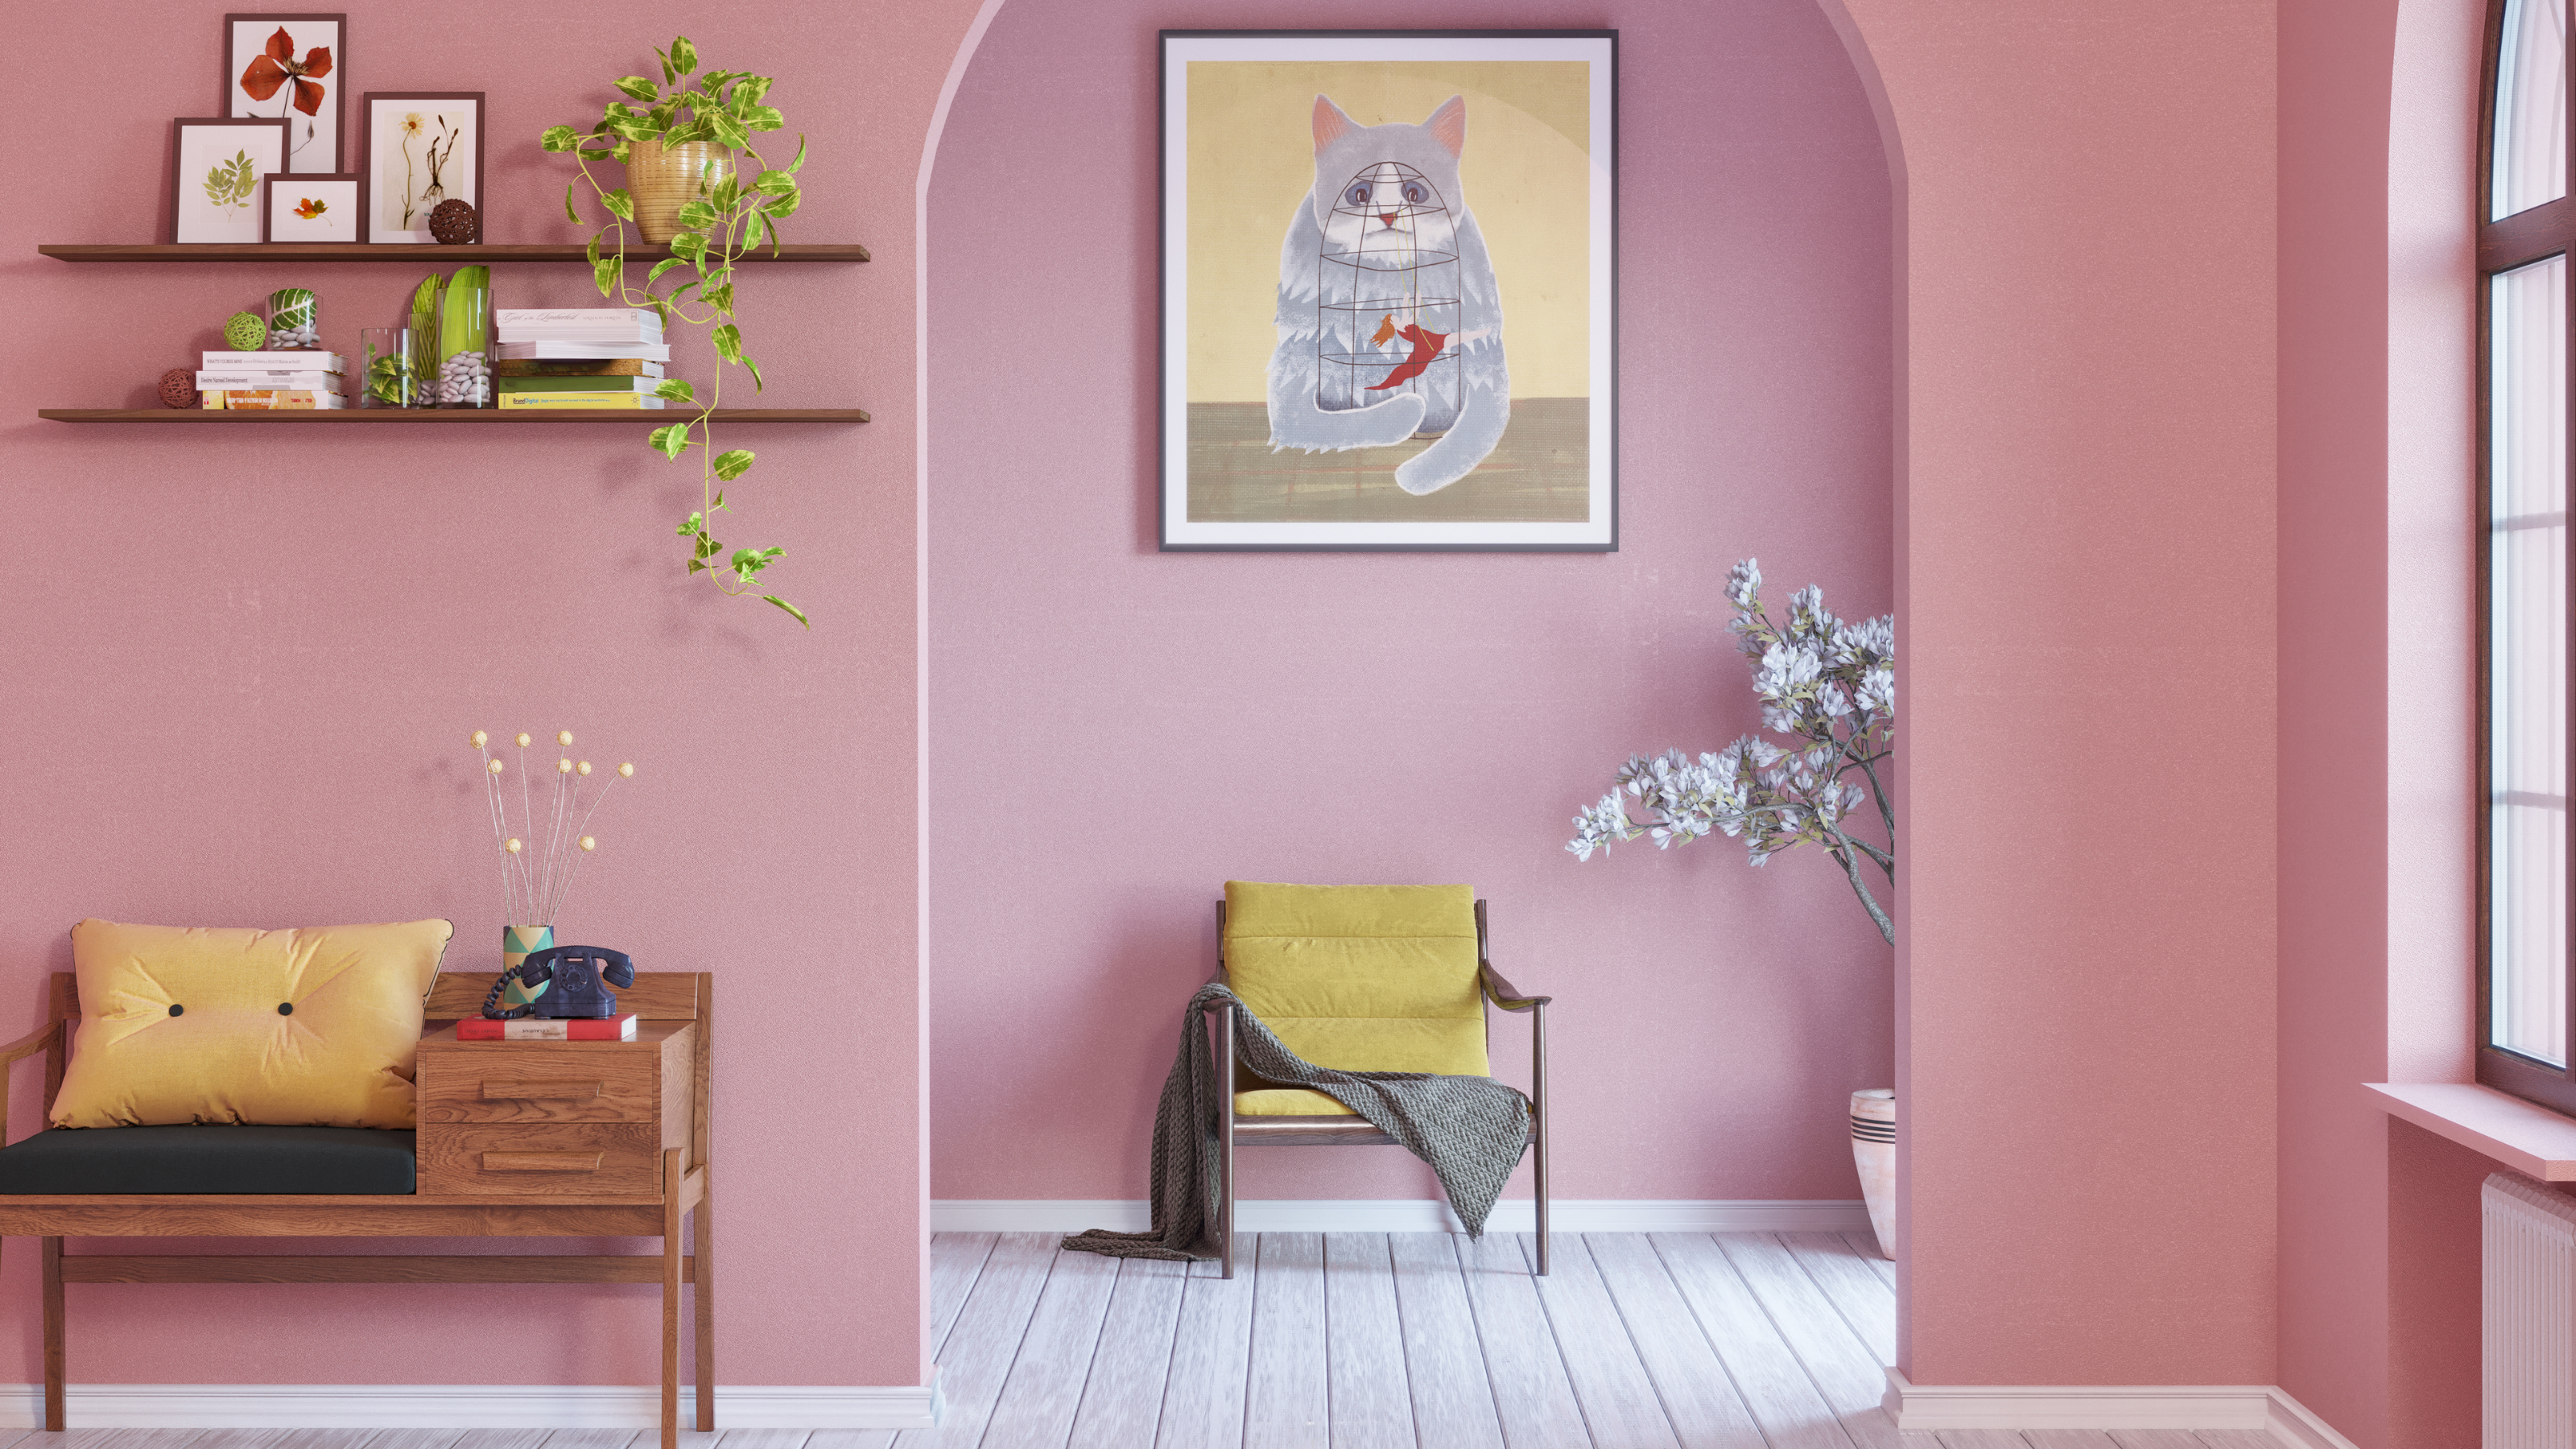 Wes Anderson Trend: 12 Wes Anderson Aesthetic Home Decor Ideas